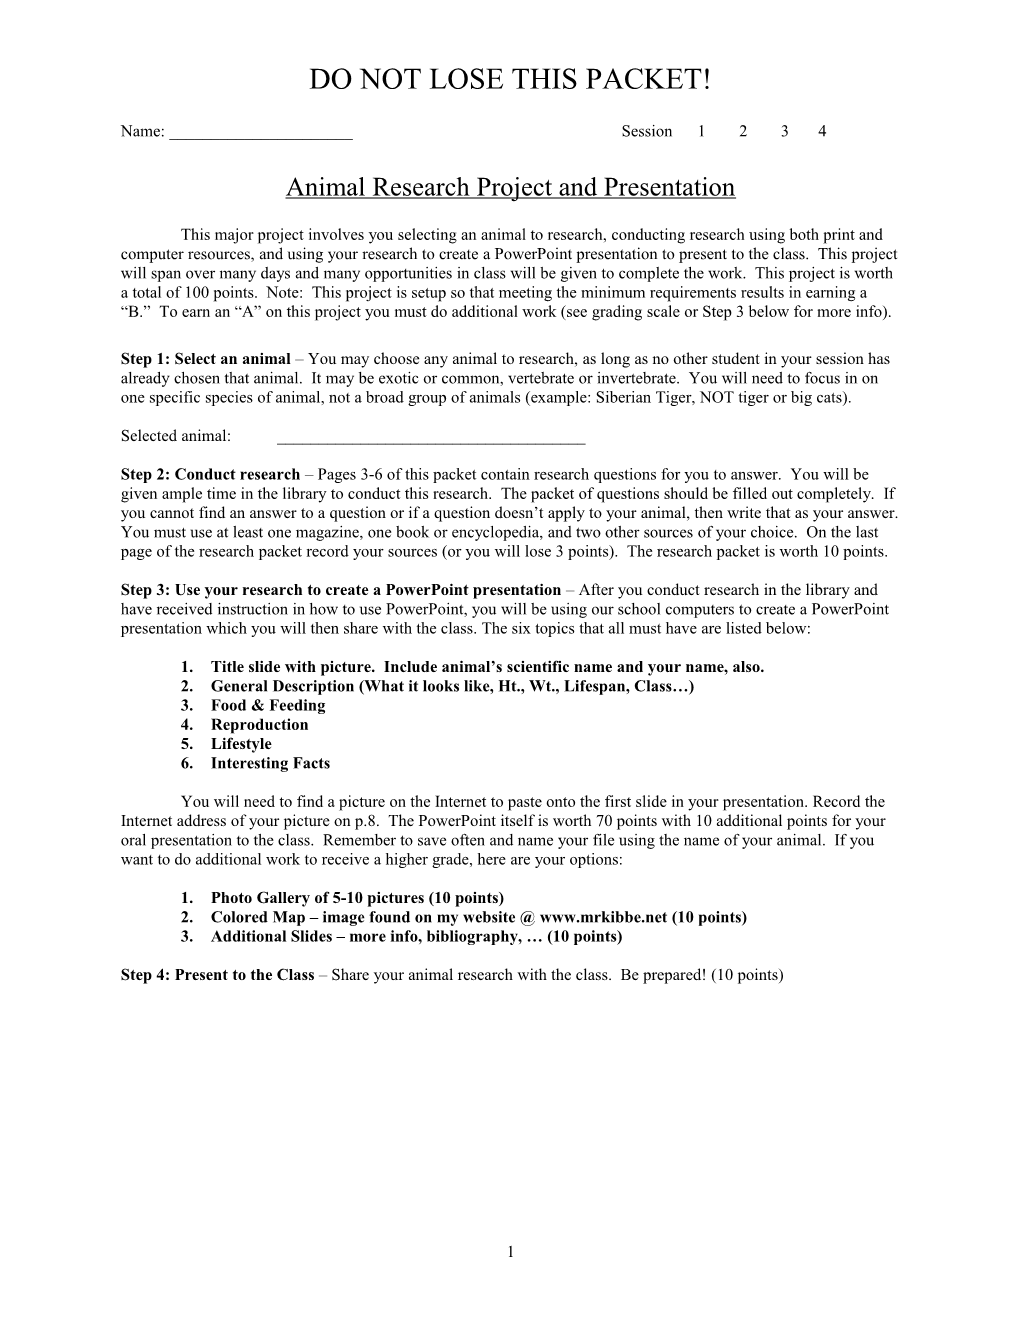 Animal Research Project and Presentation